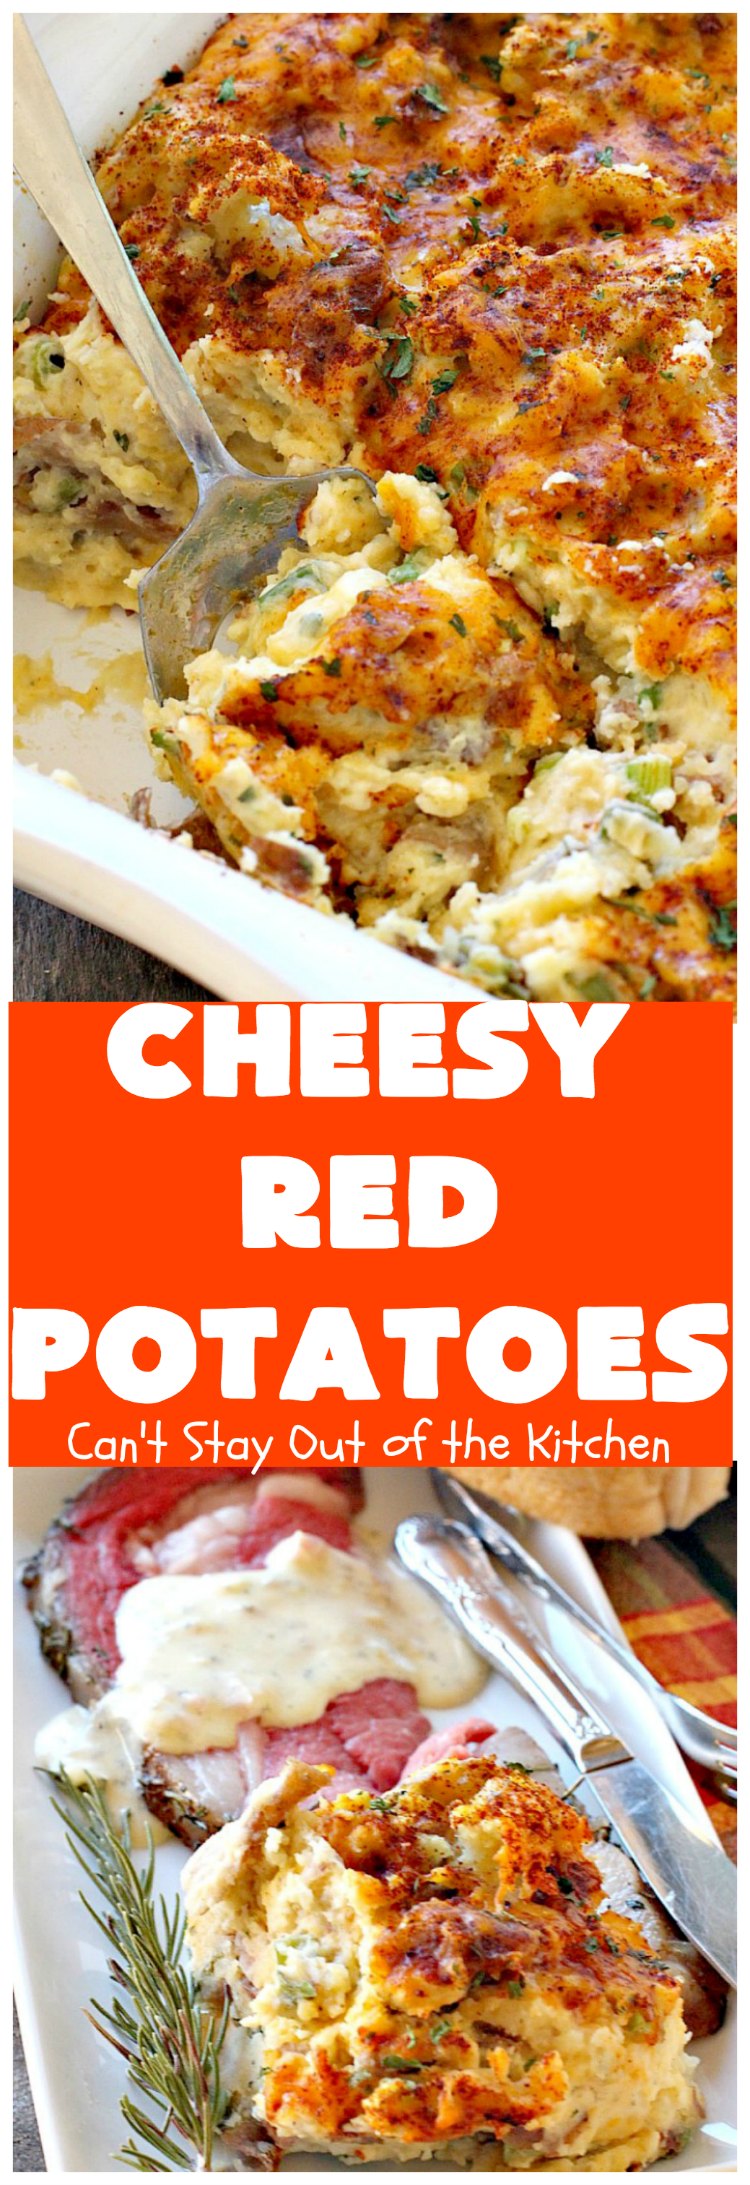 Cheesy Red Potatoes | Can't Stay Out of the Kitchen